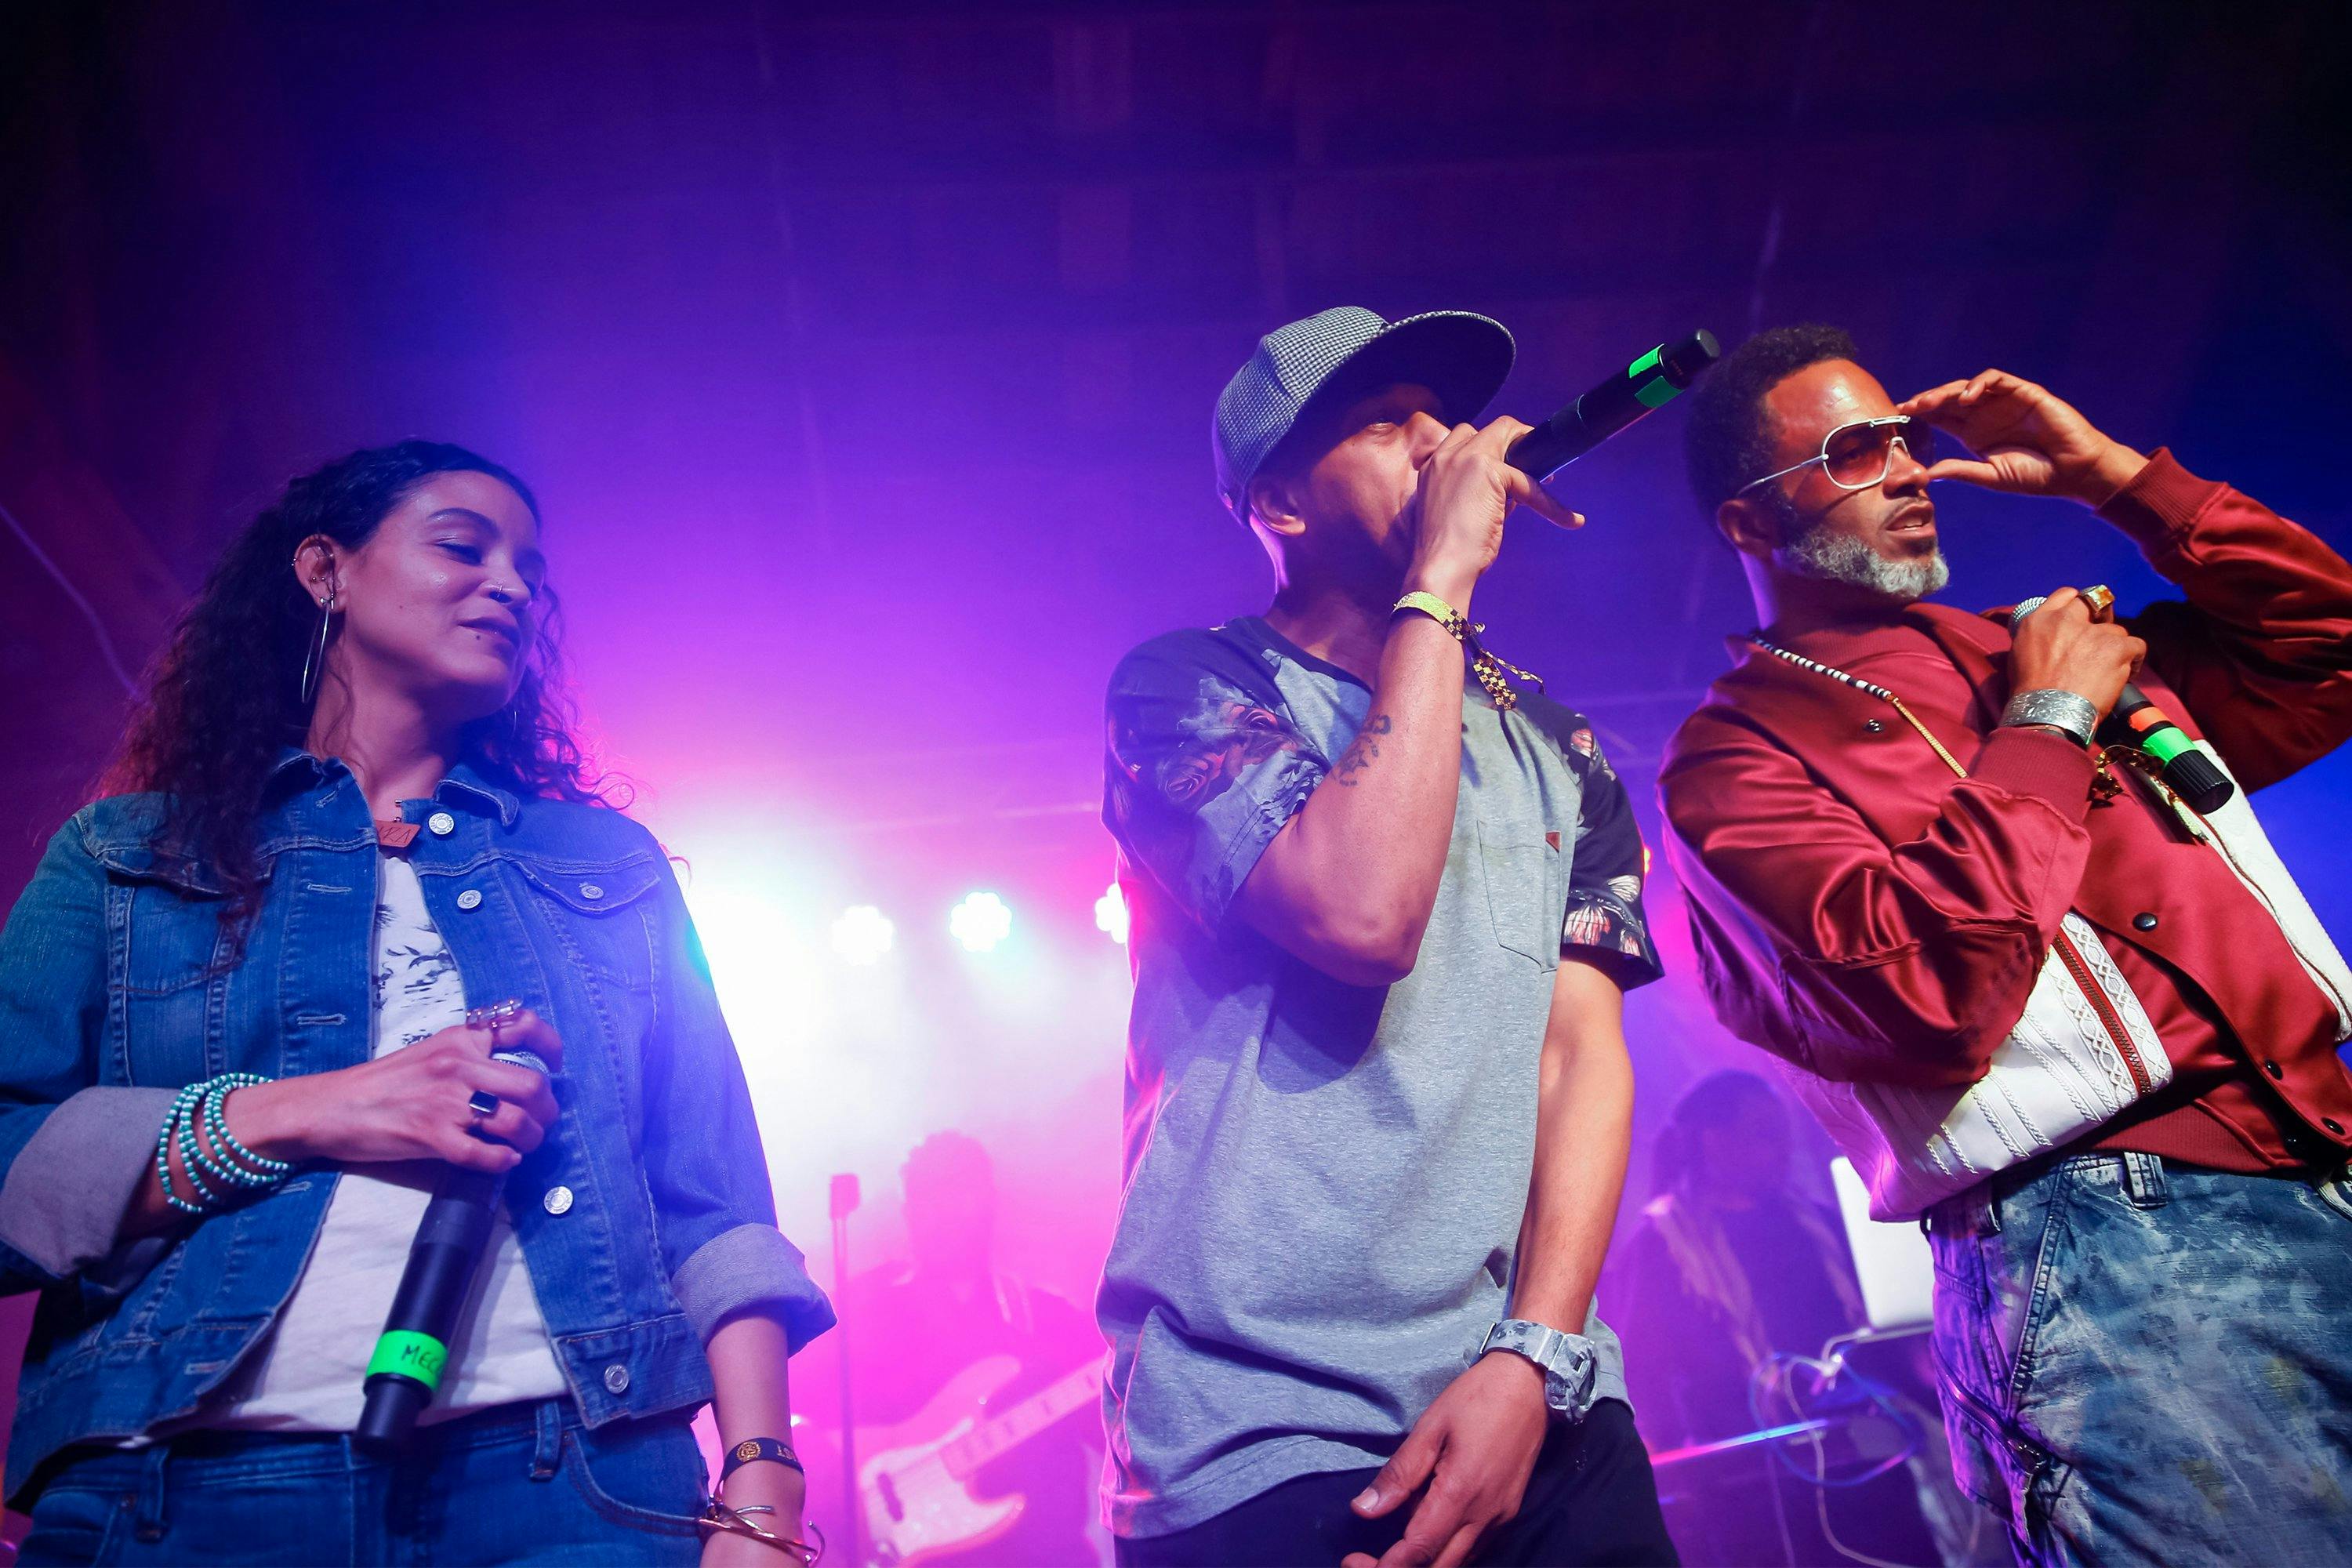 Digable Planets performs at the House Of Vans Opening In Chicago, Illinois on Feb 3, 2017. (Photo by Michael Hickey/Getty Images)